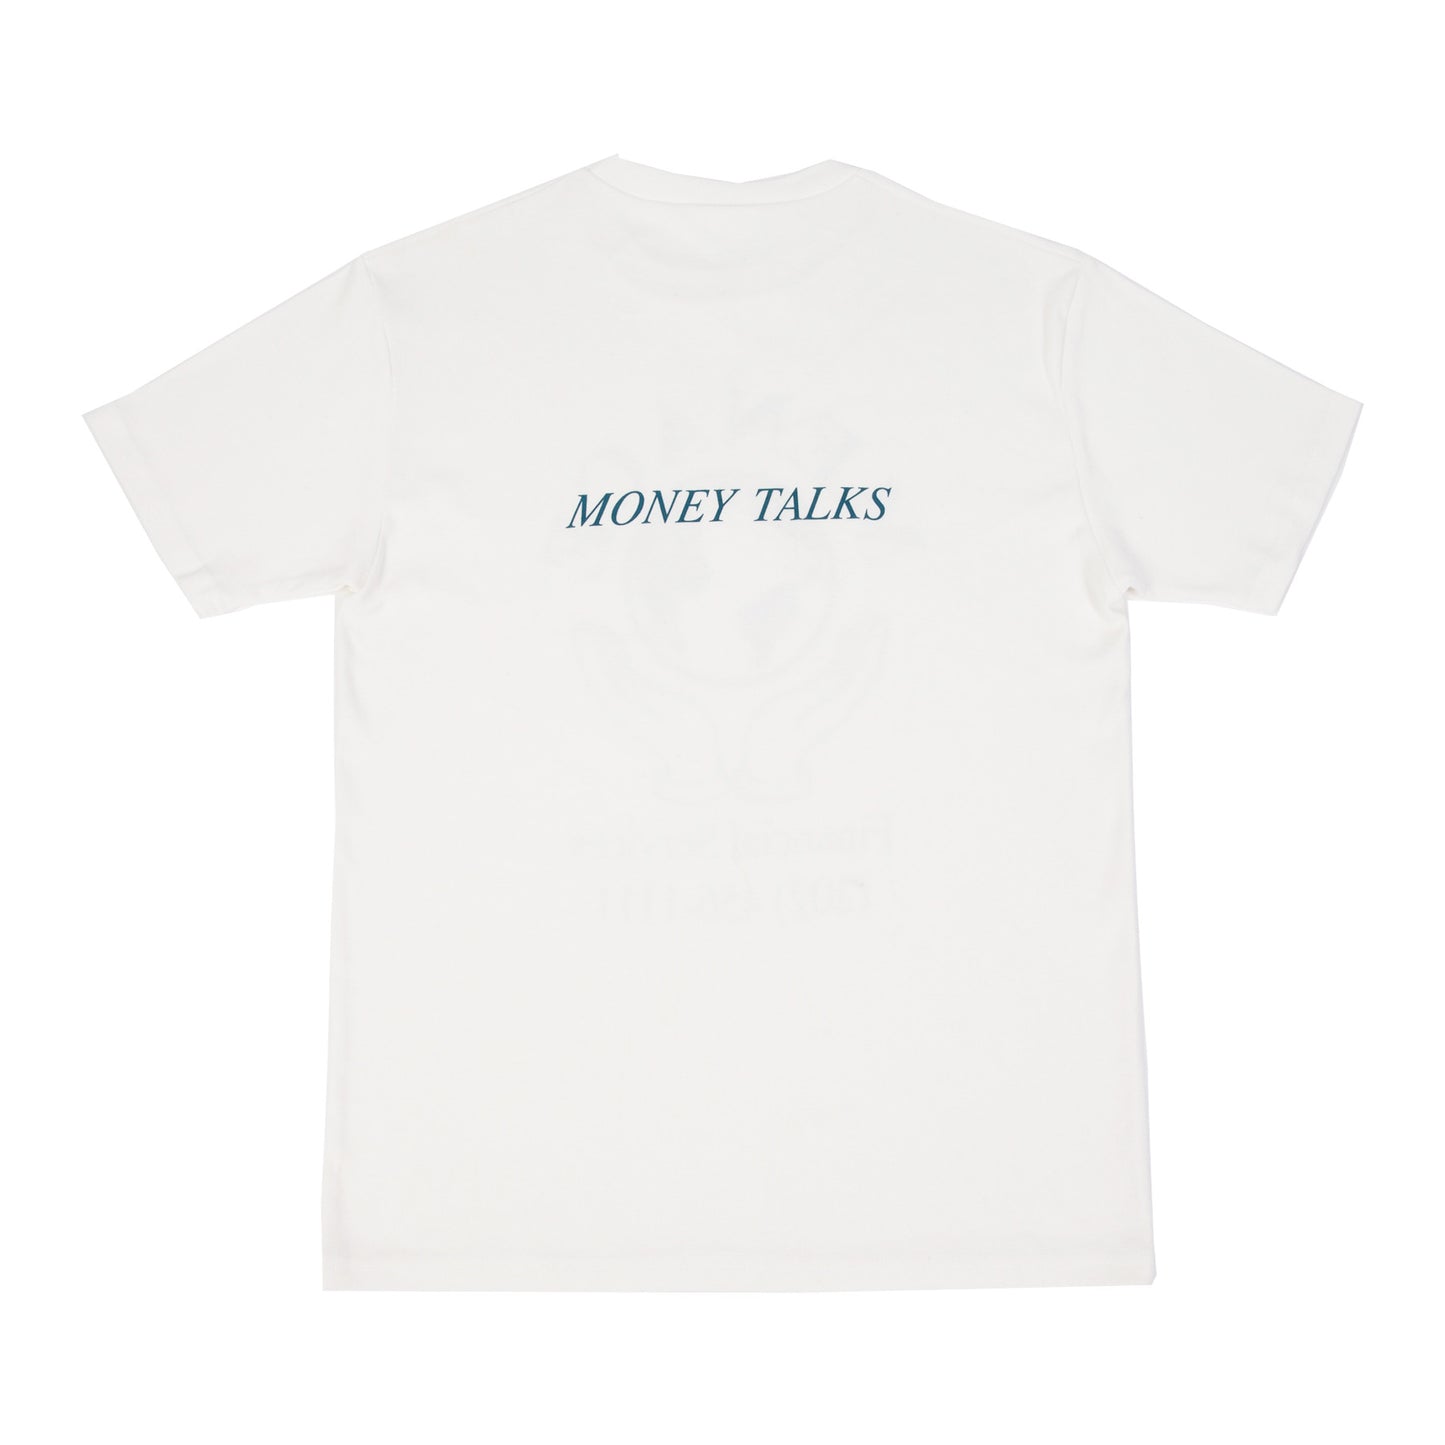 FINANCIAL SERVICES T-SHIRT by MENACE